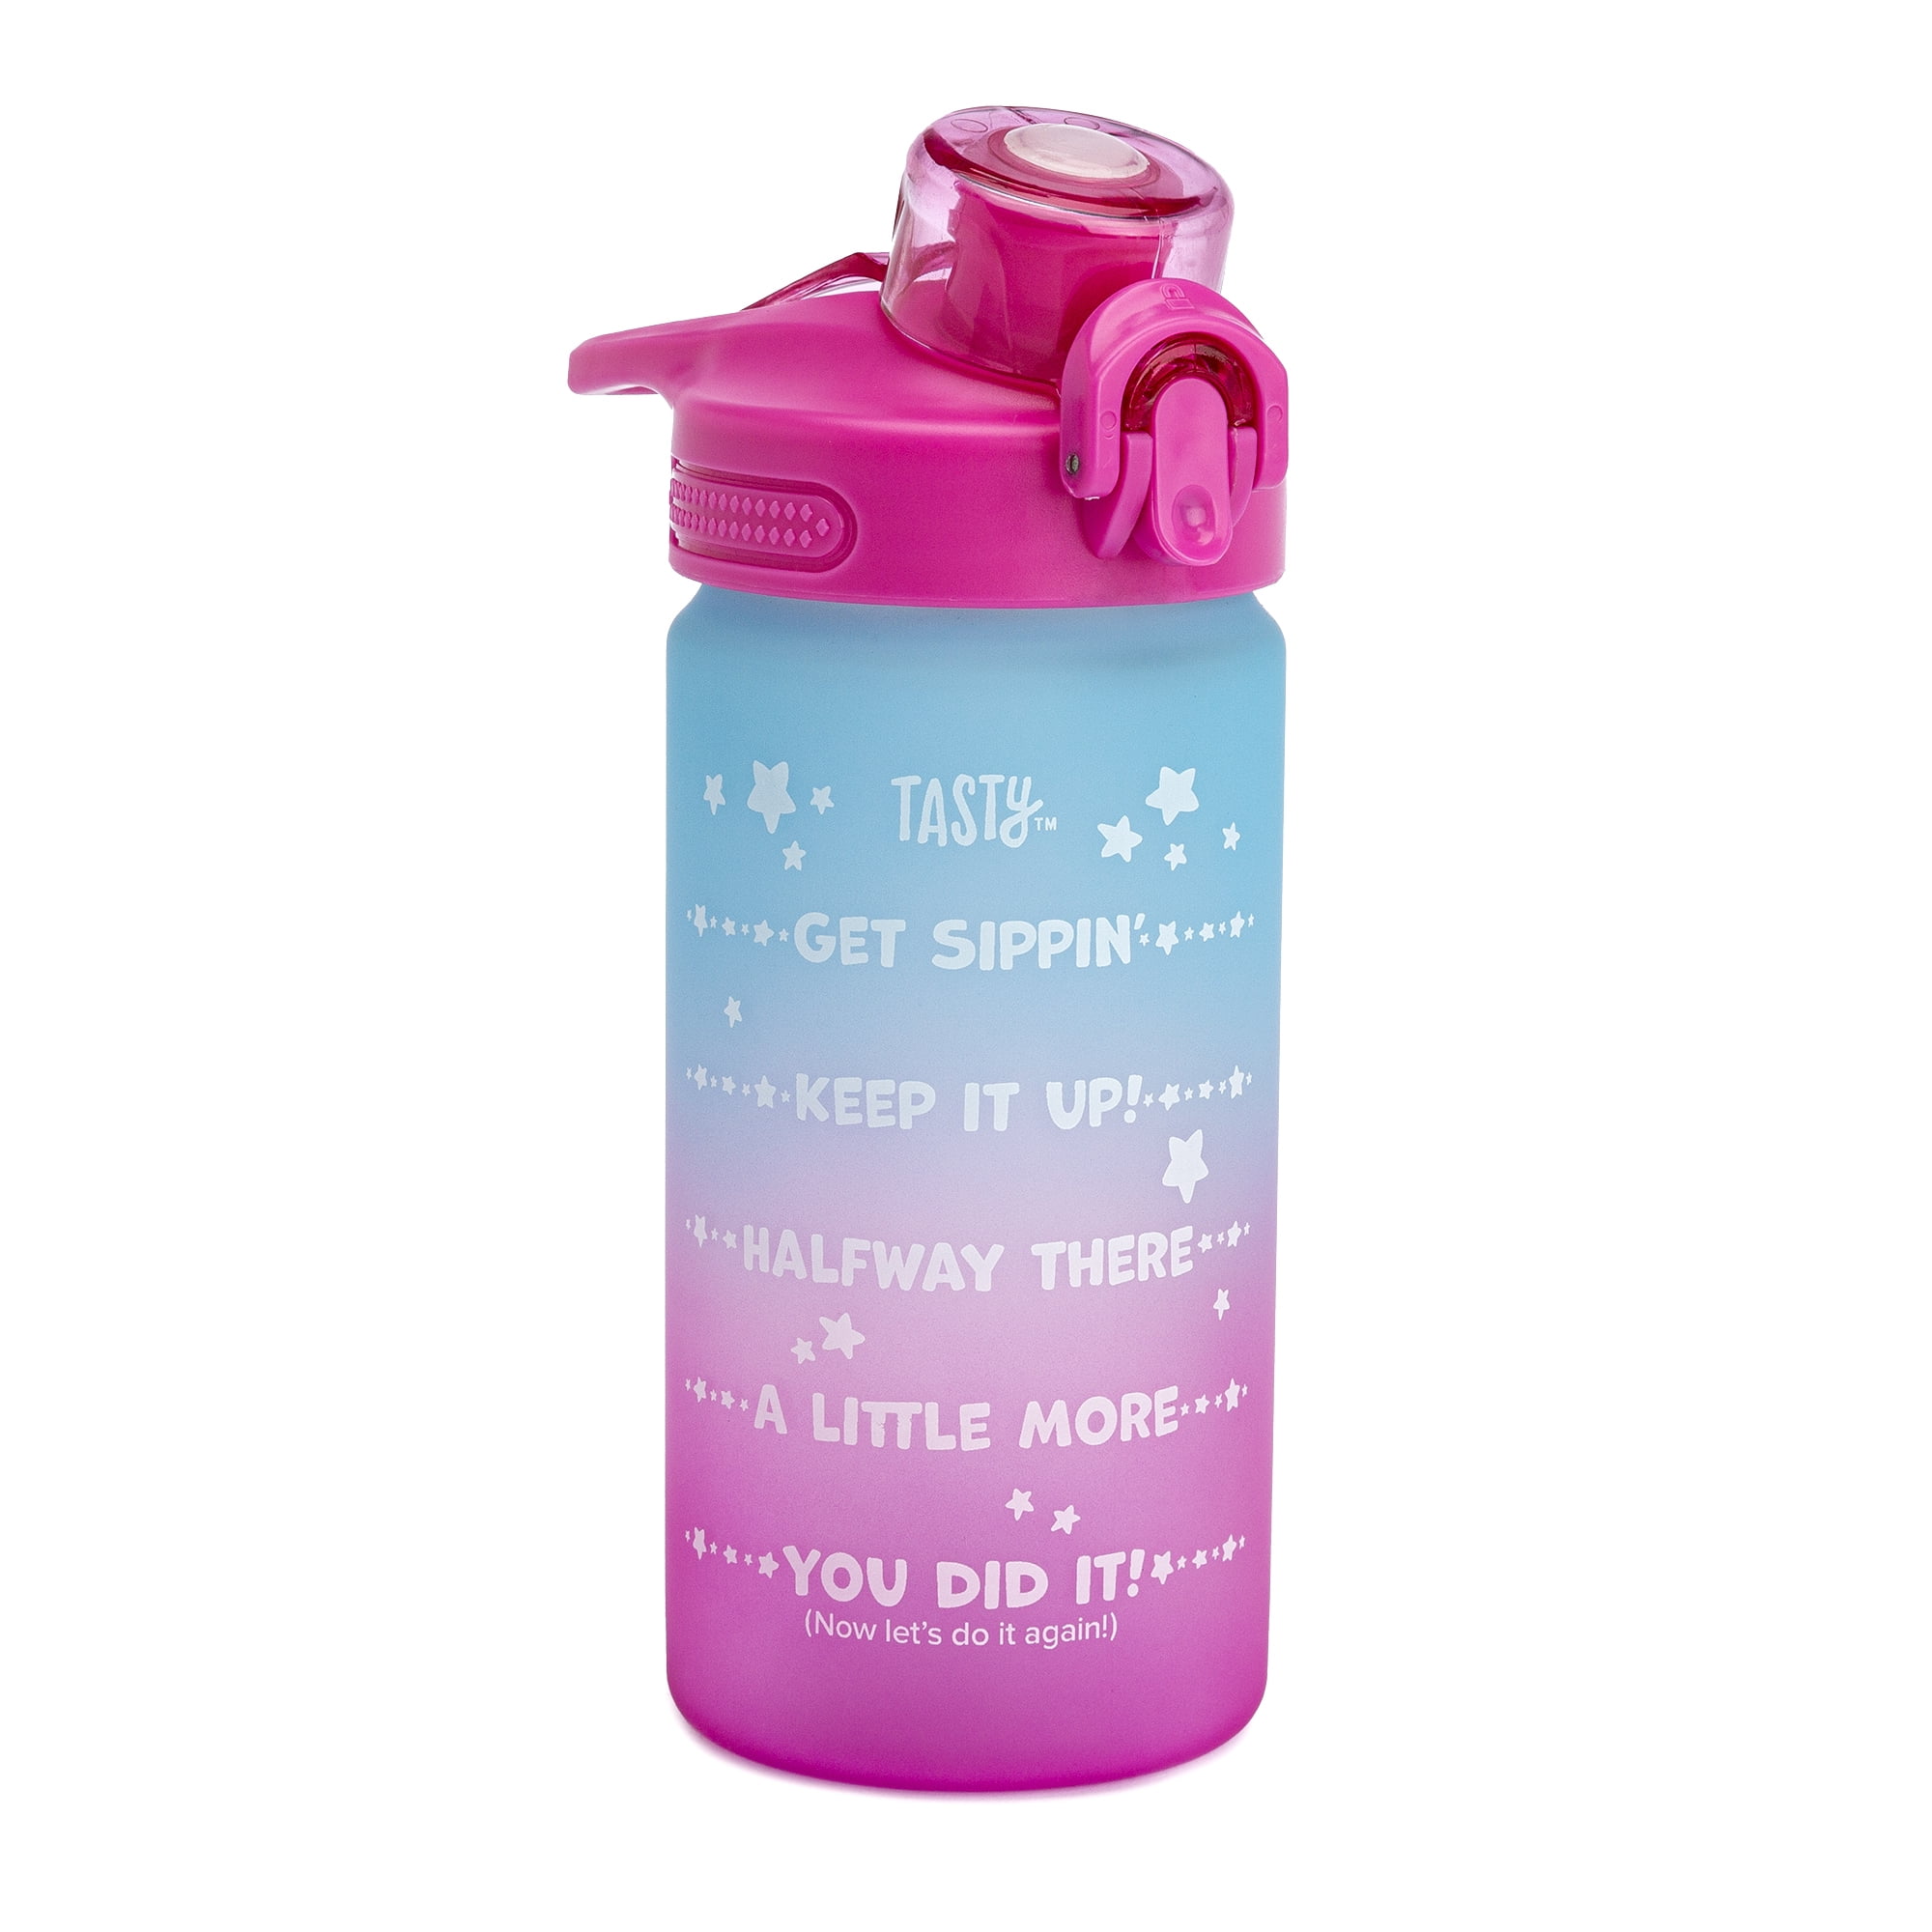  Tasty Kids water bottle 16 oz with Wide Mouth and Flip